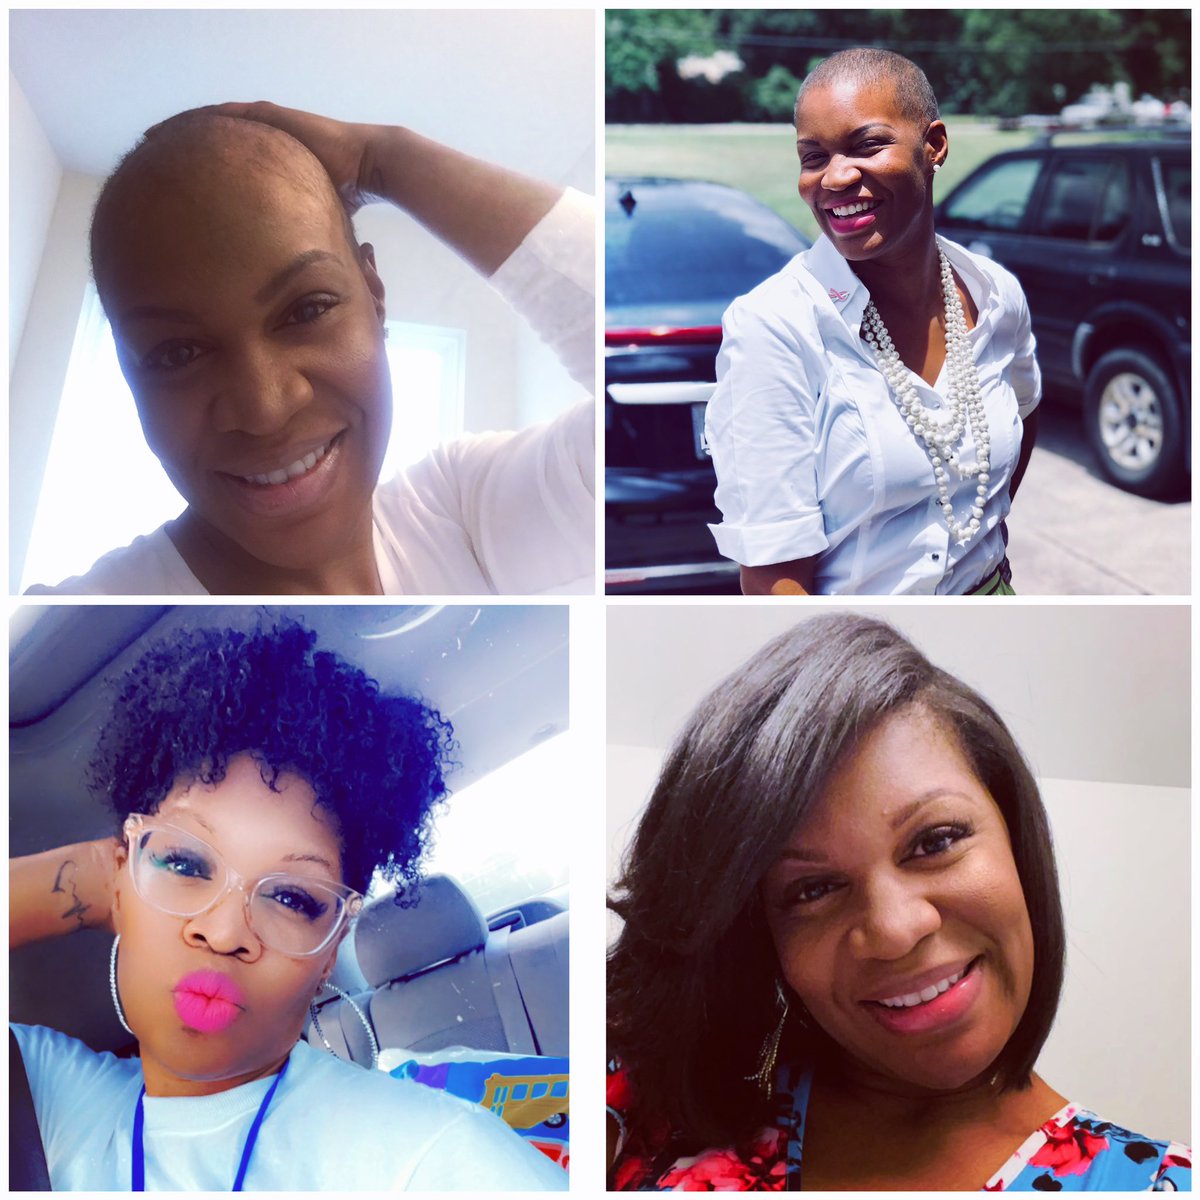 National Cancer Survivor Day 2023
Cheers to 5️⃣years #Surviving #Thriving #BreastCancerOvercomer #EarlyDetectionMatters #CheckYourTatas #Grateful #Healing #Restoration